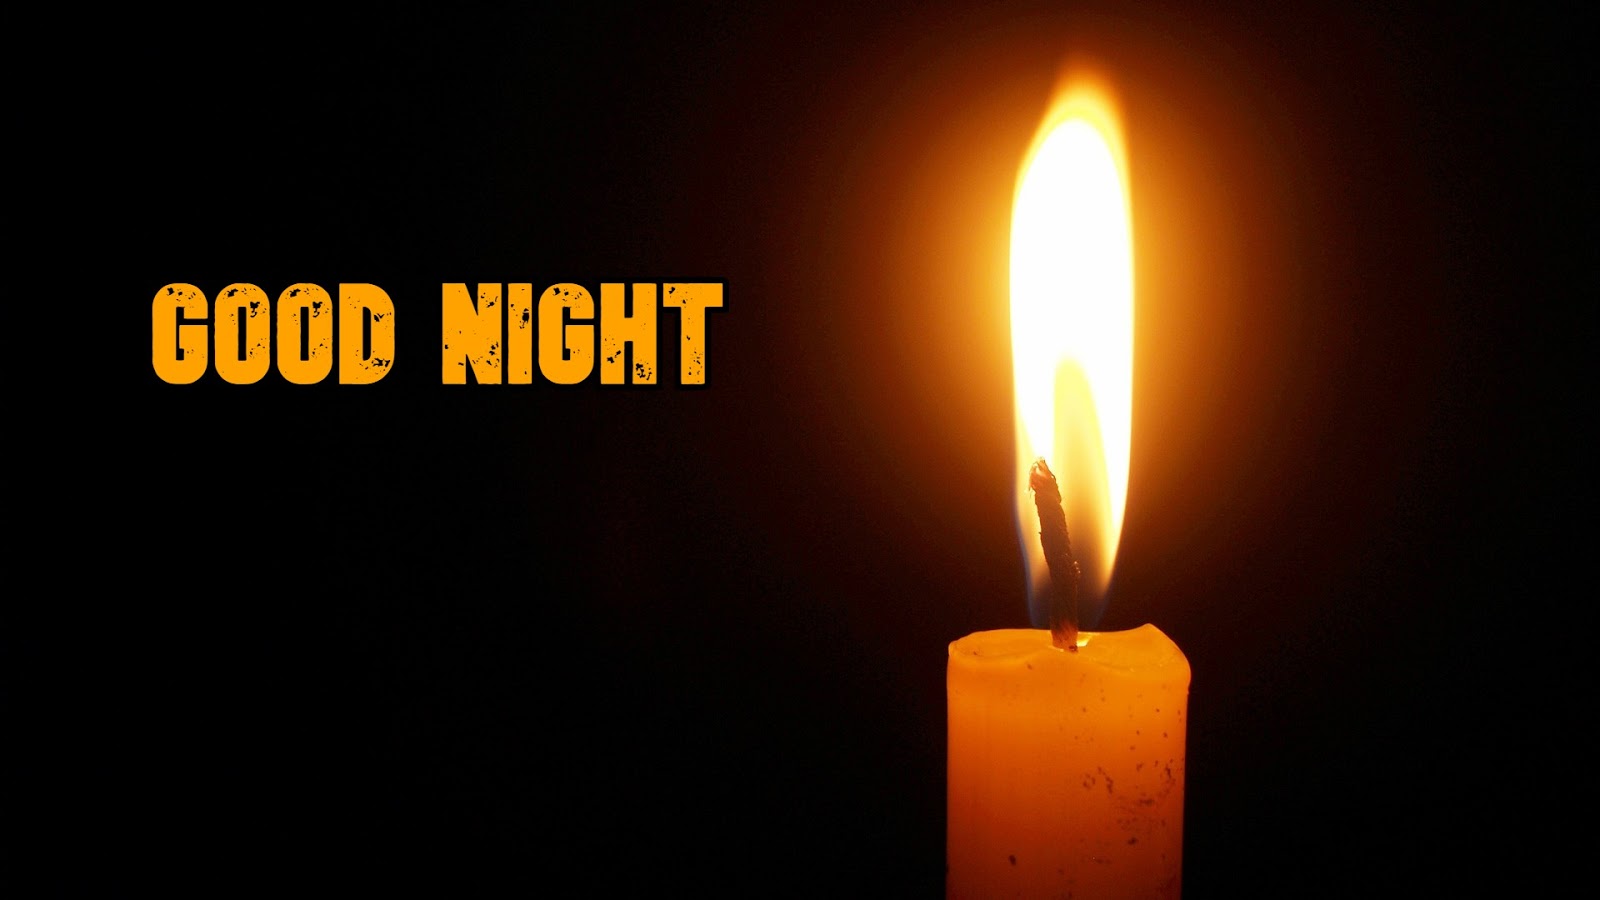 Good Night Images For Lover Hd - Advent Candle - HD Wallpaper 